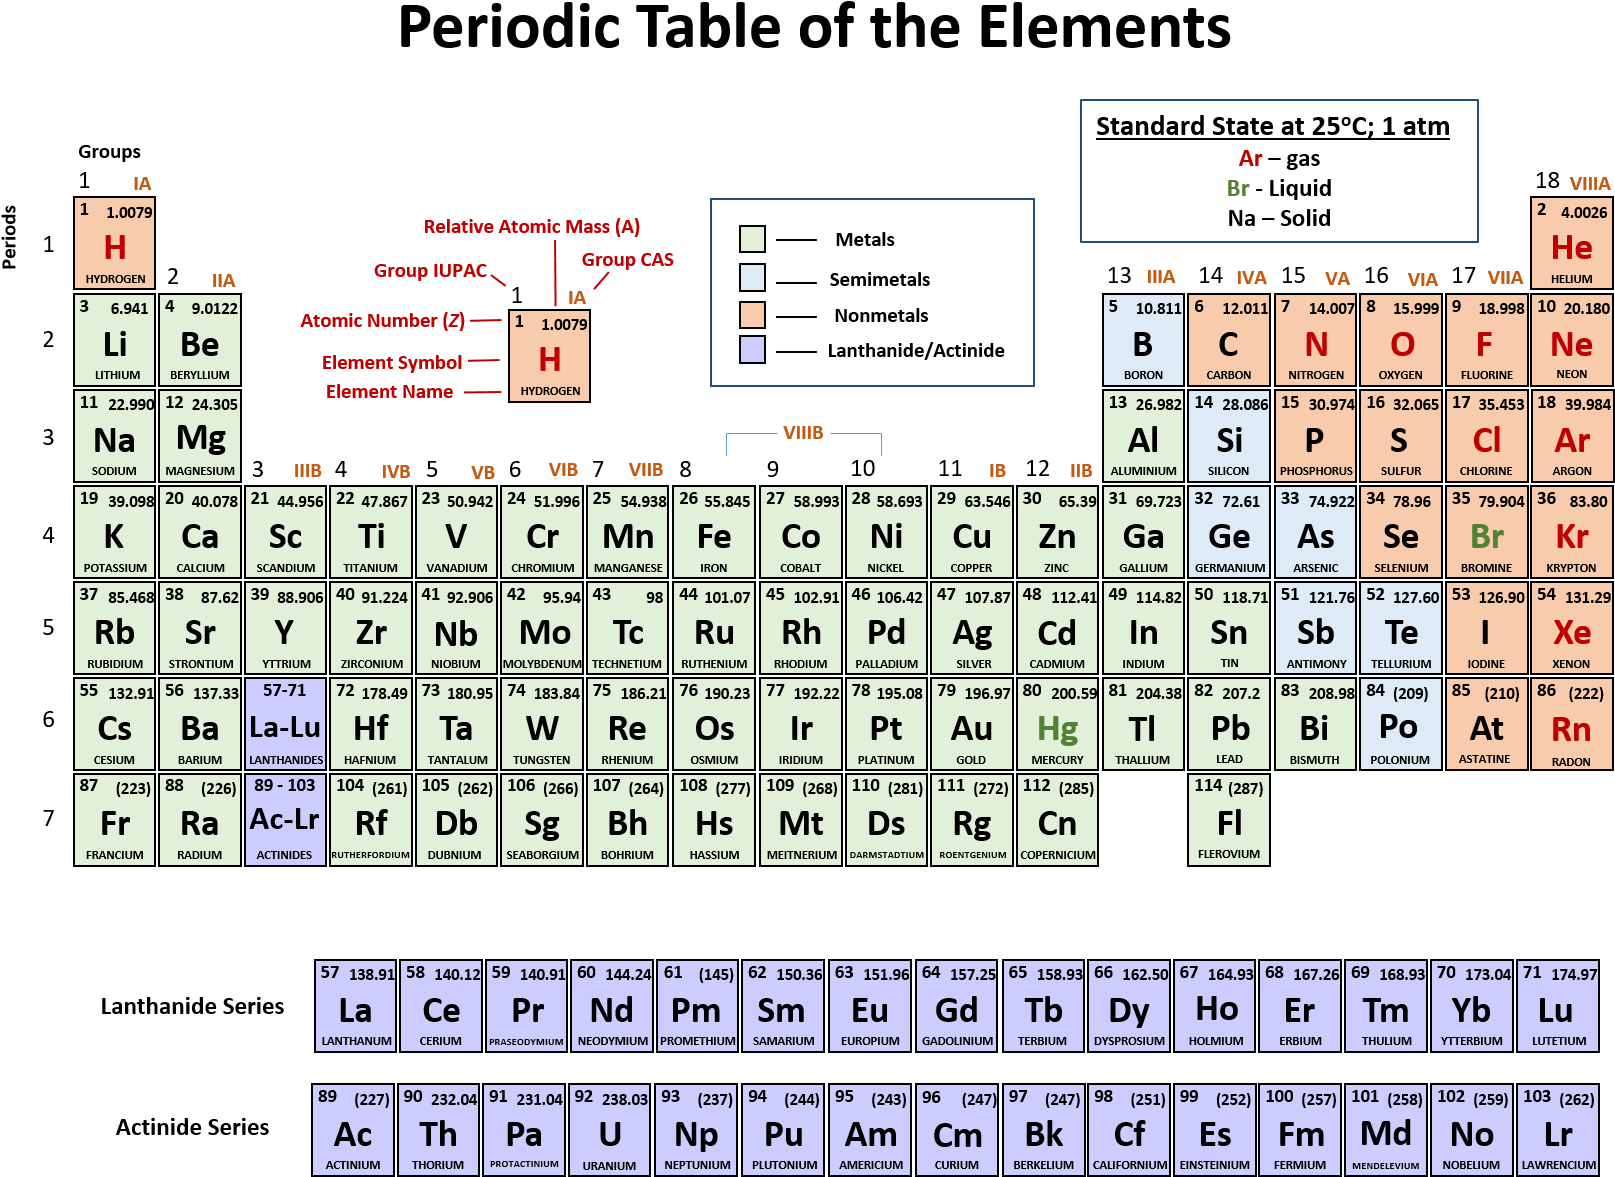 Detailed Periodic Tableof Elements